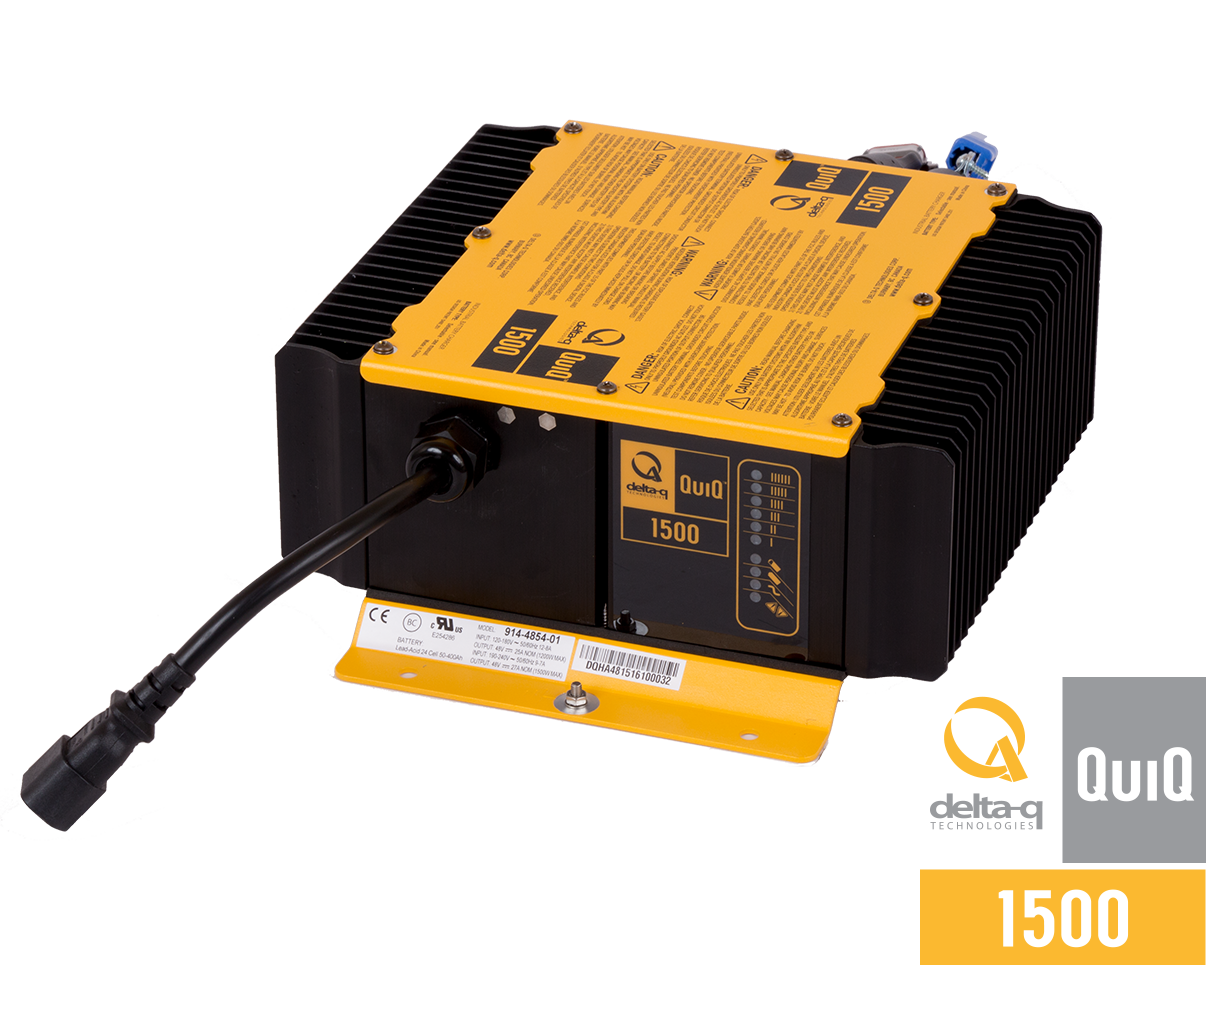 QuiQ-1500 in yellow and black with transparent background